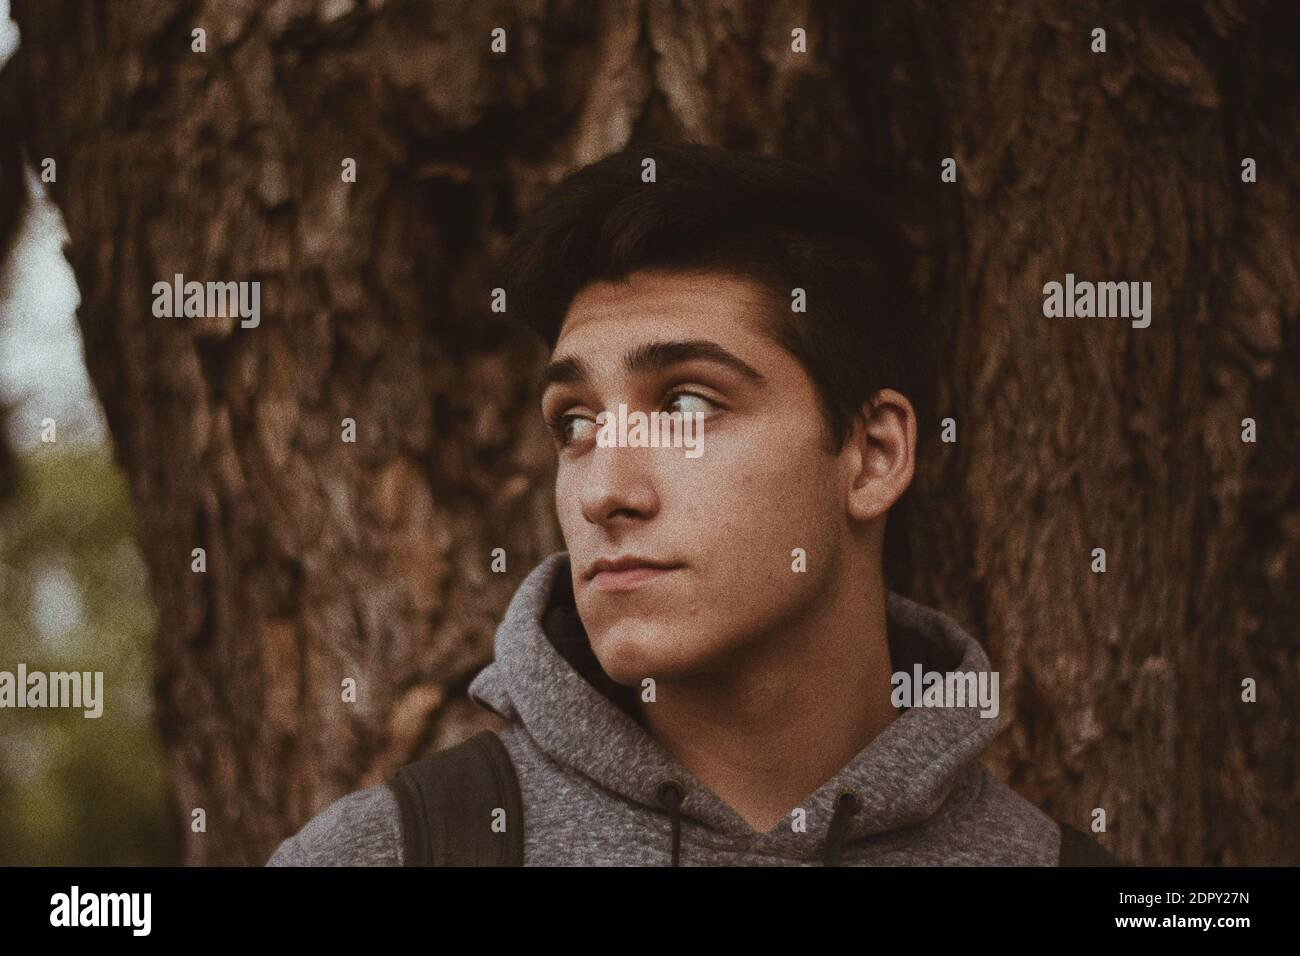 Young Man Looking Away By Trees Stock Photo